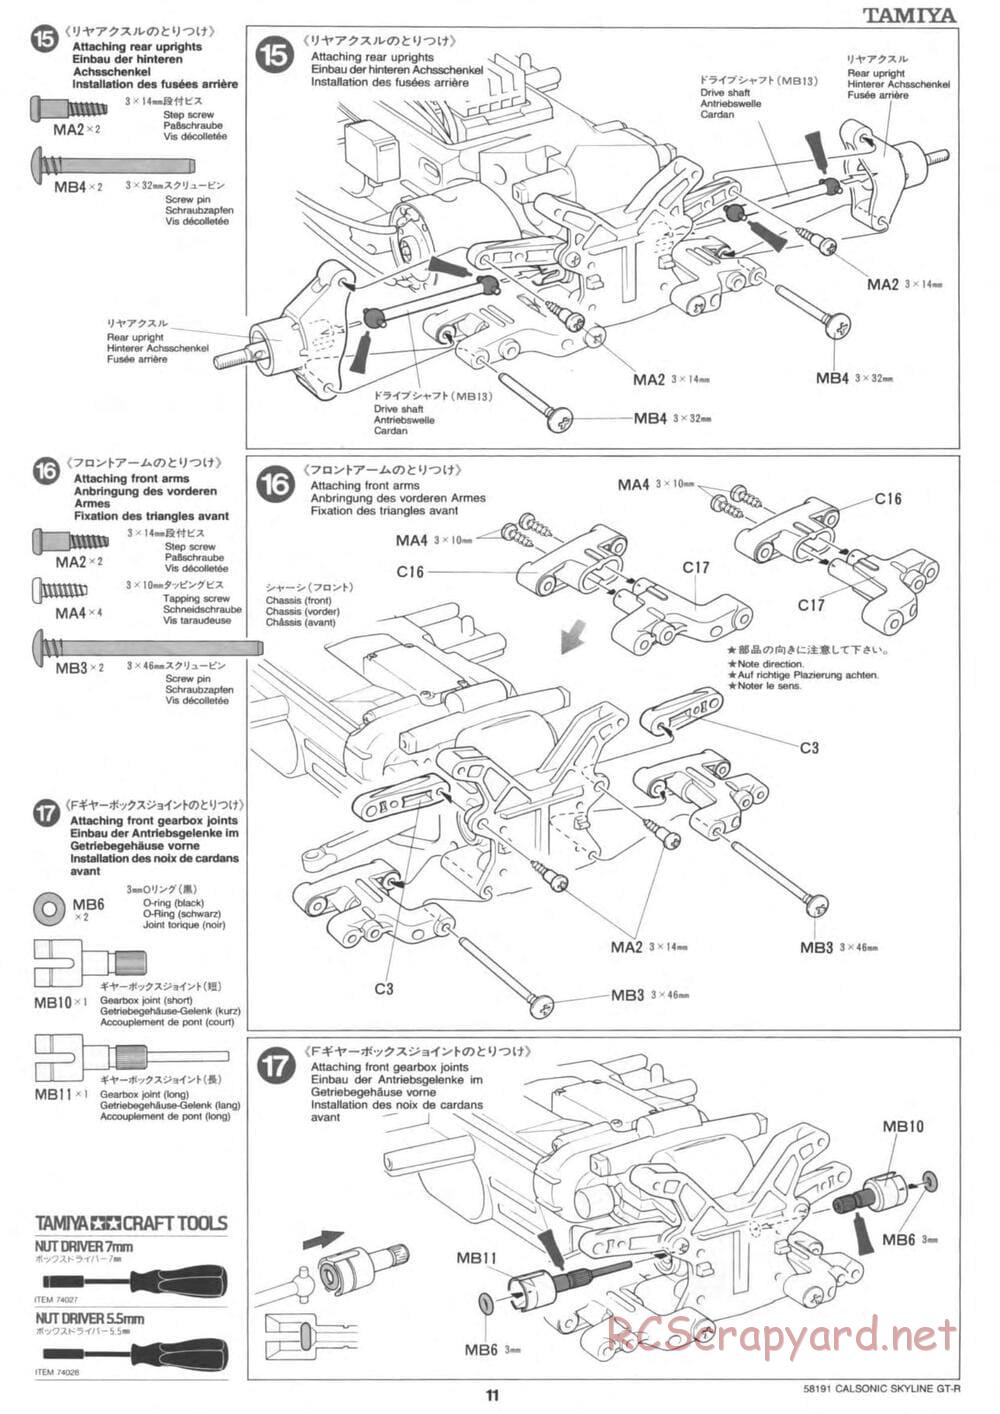 Tamiya - Calsonic Skyline GT-R - TL-01 Chassis - Manual - Page 11